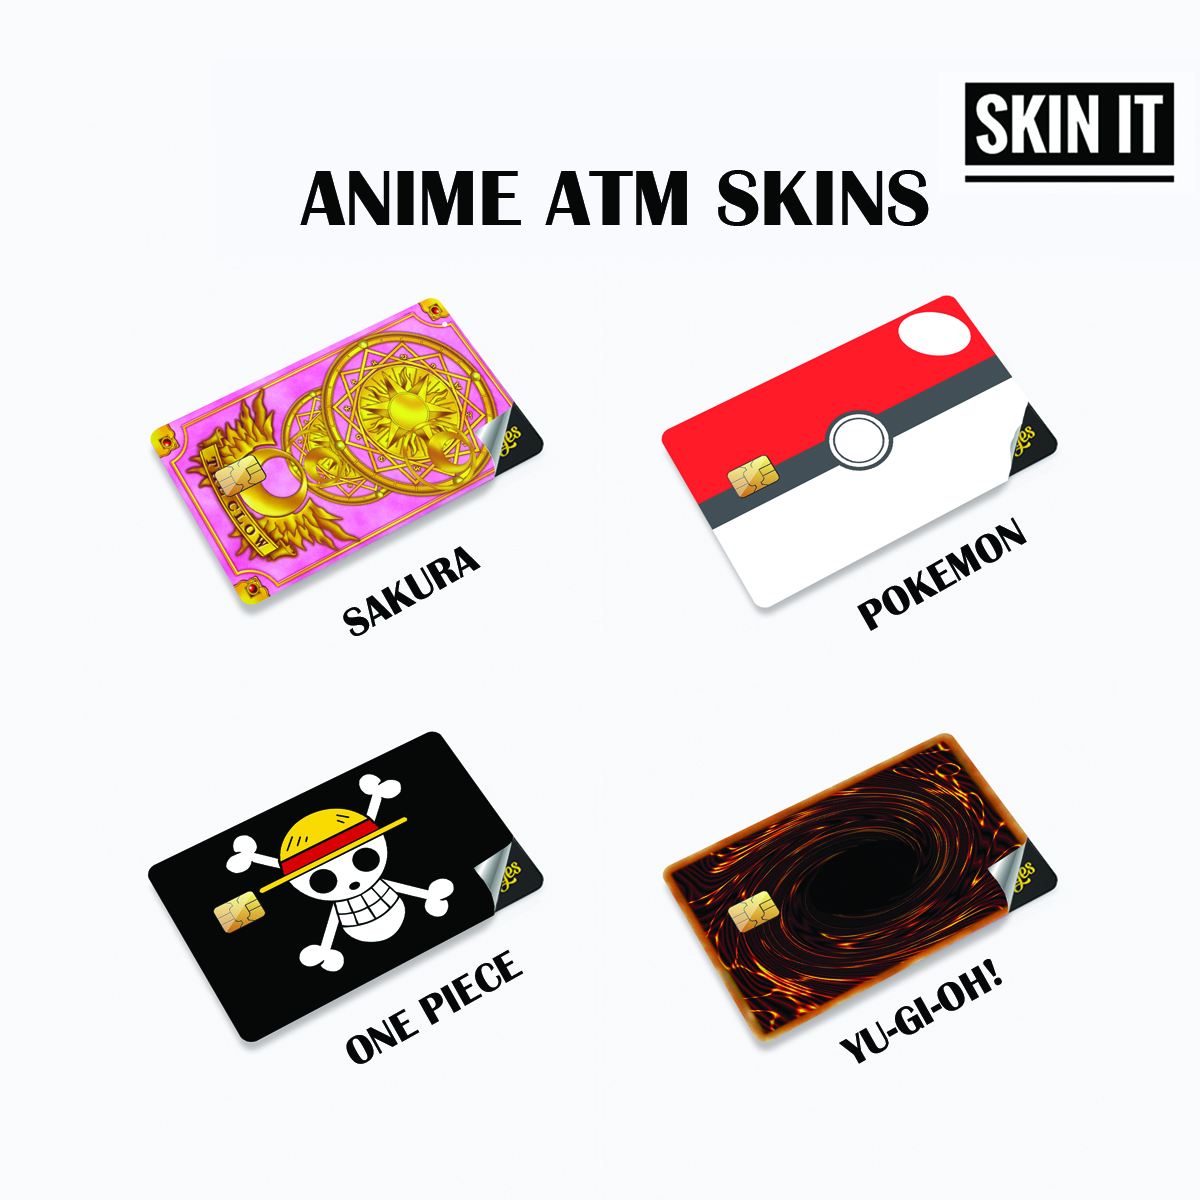 Buy Attack On Titan Stamp Credit Card Skin Anime | Removable Vinyl  Waterproof Debit Card Sticker Cover for Key, Debit, Credit Card |  Protecting & Personalizing Bank Card, No Bubble Anti-Wrinkling Cover